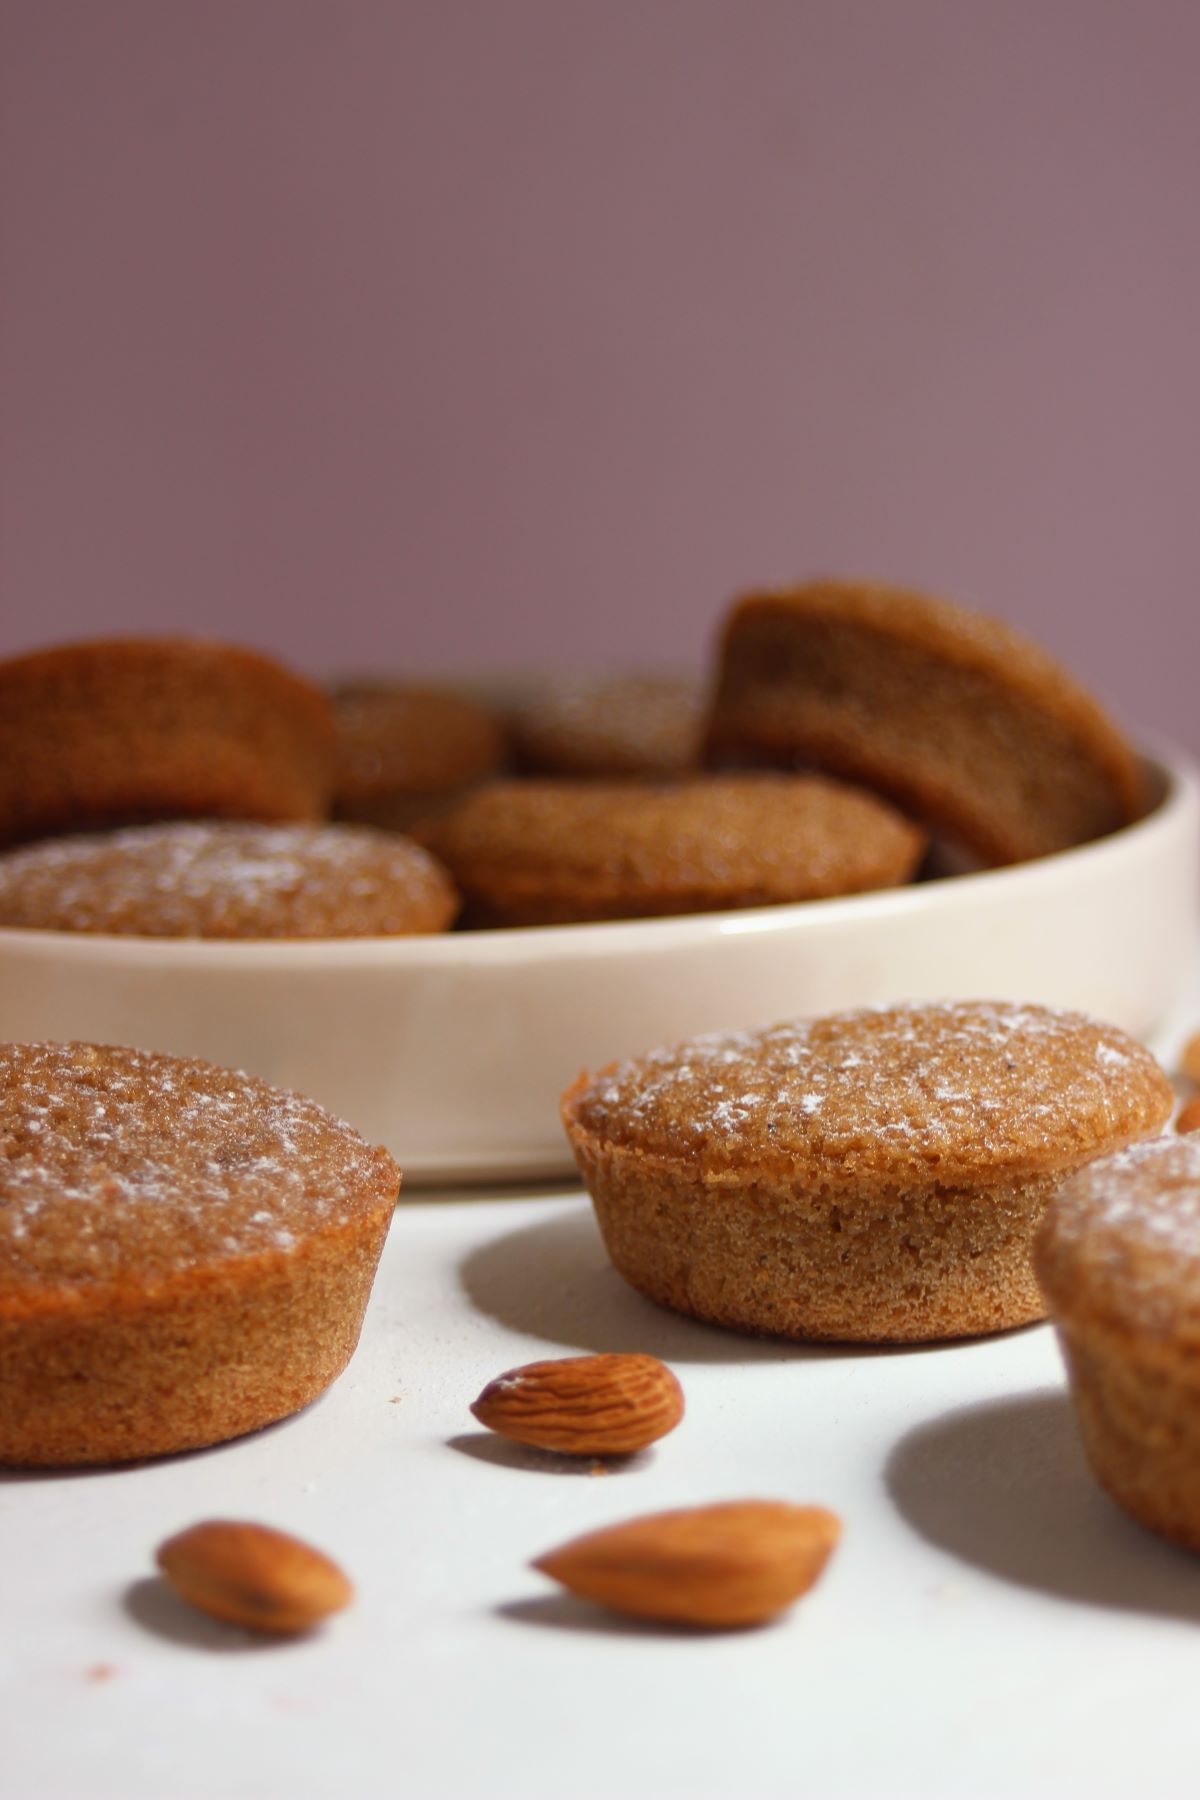 Financiers and almonds on a white surface. Many financiers are in the background on a plate.